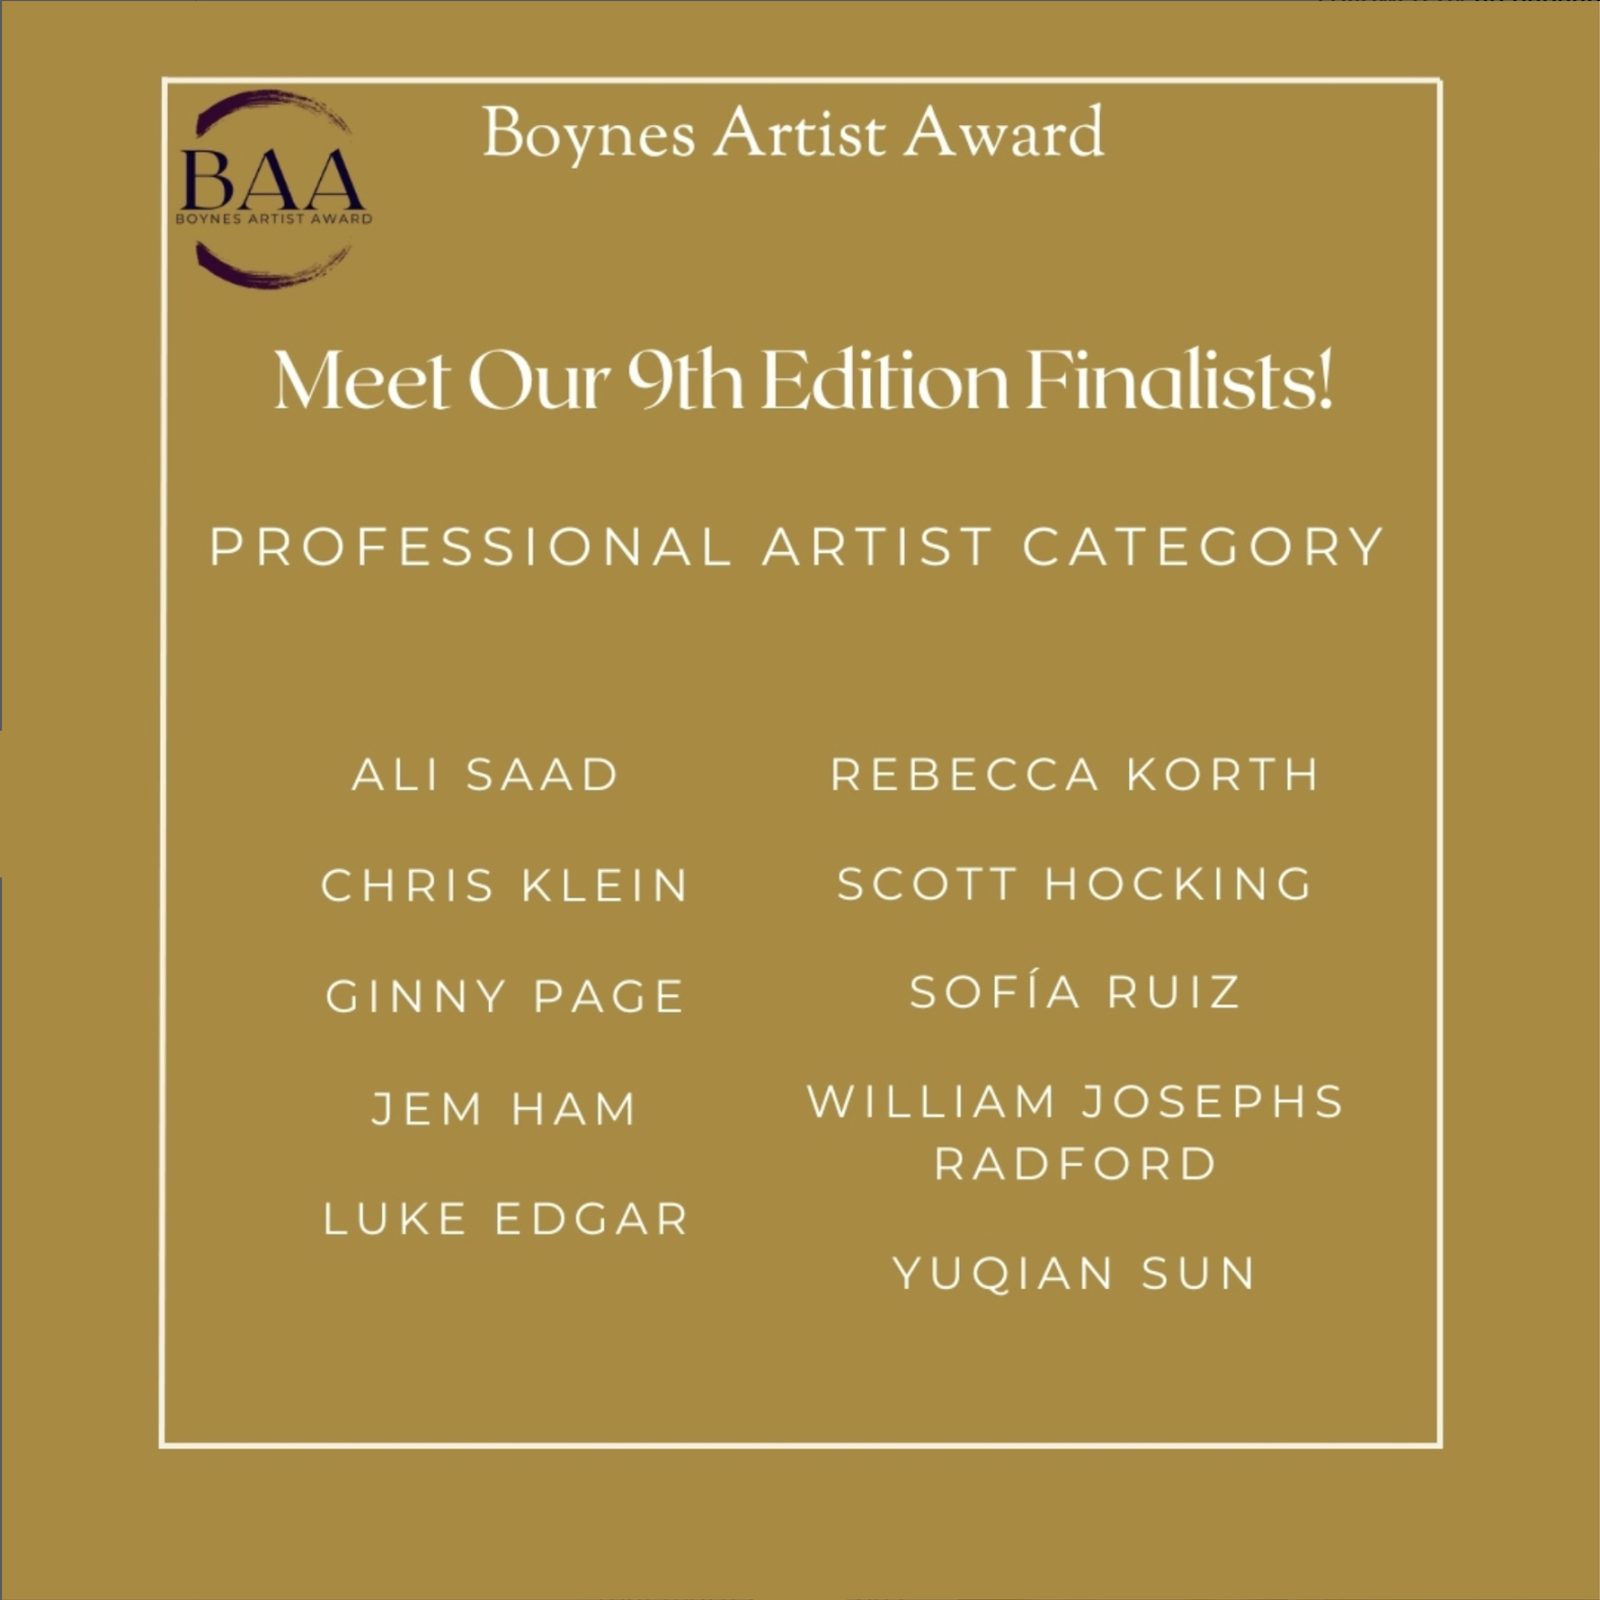 List of finalists for the Boynes Art Award 9th Edition professional art category